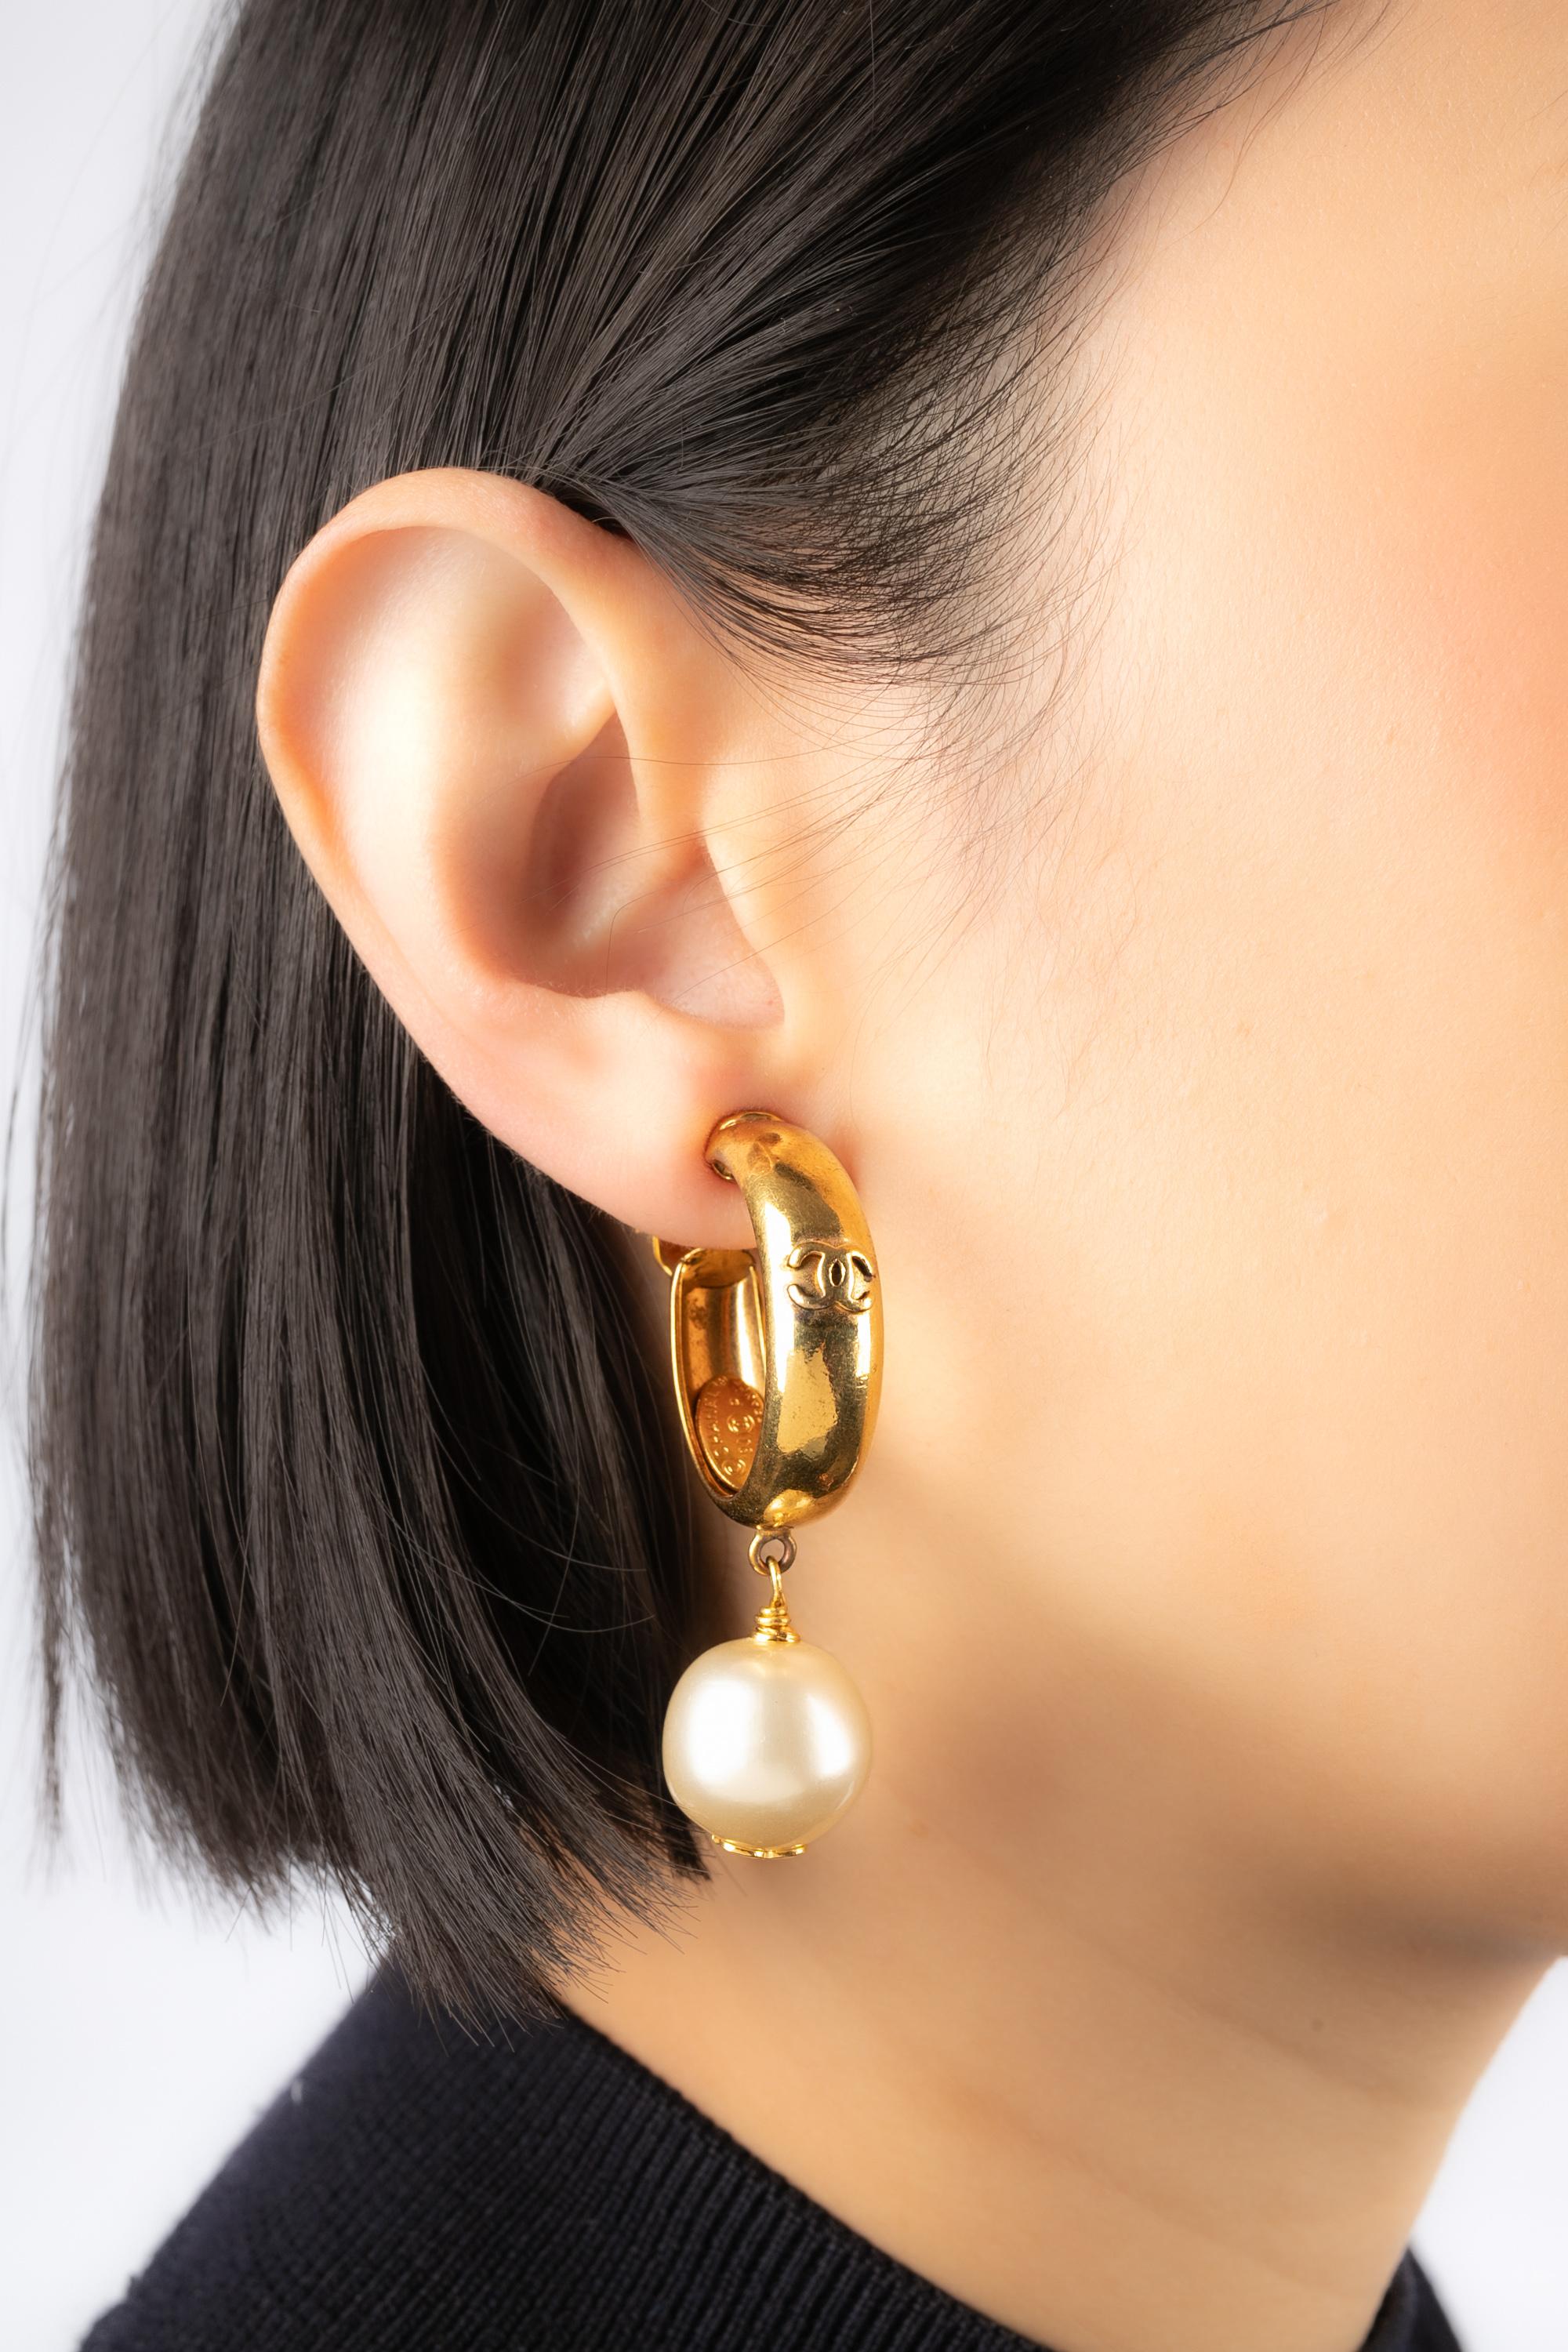 CHANEL - (Made in France) Golden metal clip-on earrings with a large hoop style and a costume pearl. 1993 Spring-Summer Ready-to-Wear Collection.

Condition:
Very good condition

Dimensions:
Length: 5.5 cm

BOB239